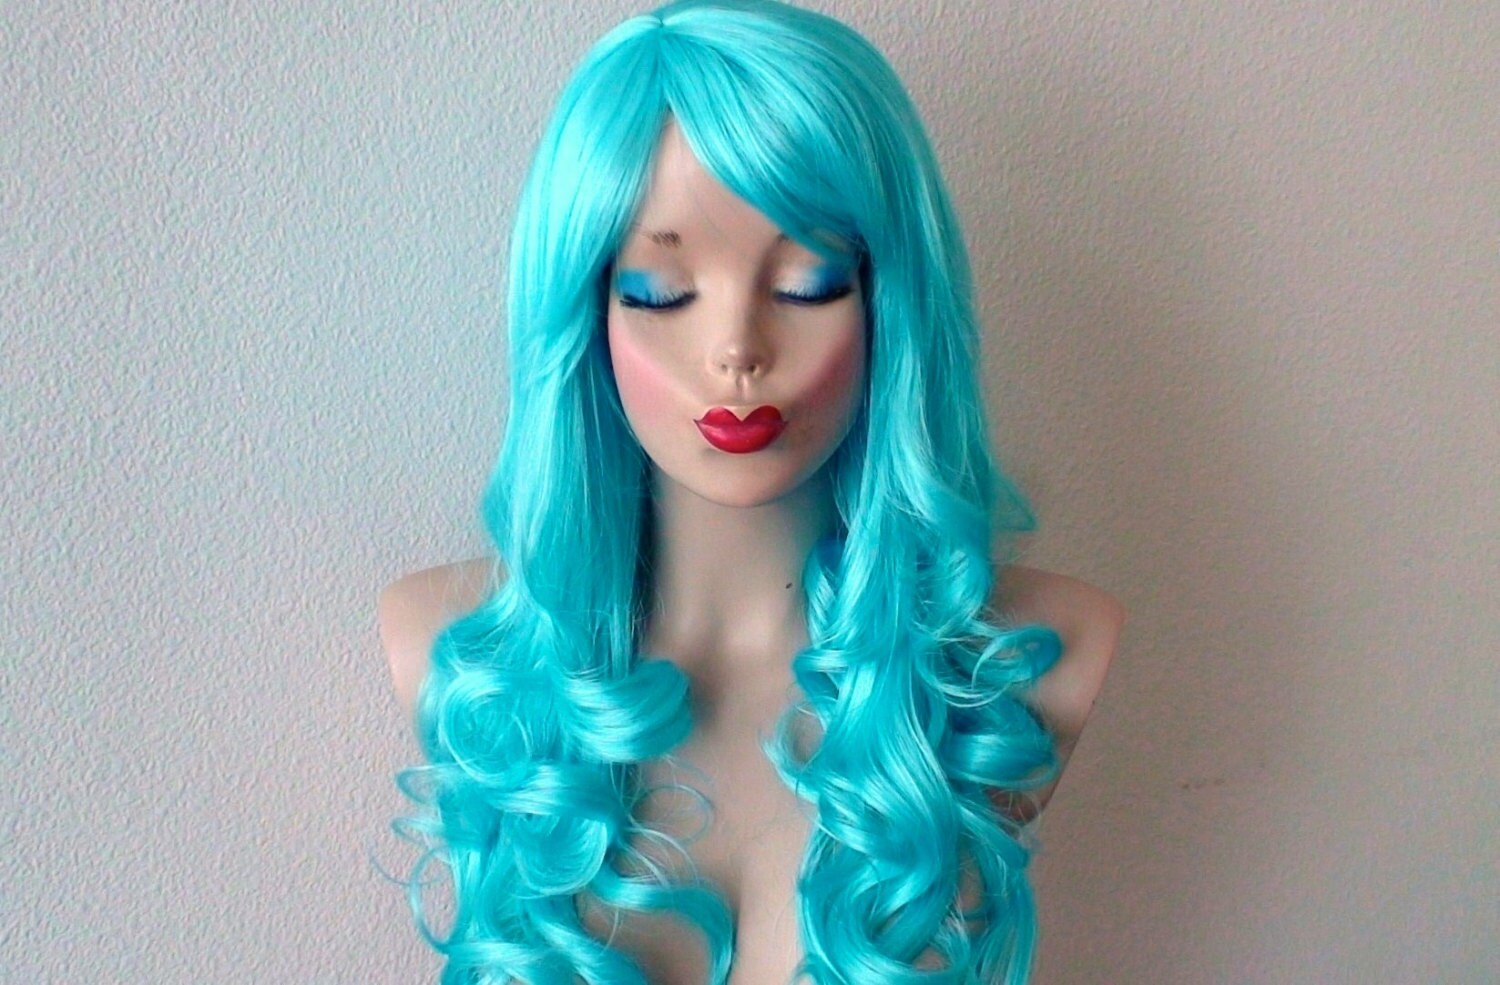 1. Light Blue Synthetic Hair Wig - wide 4